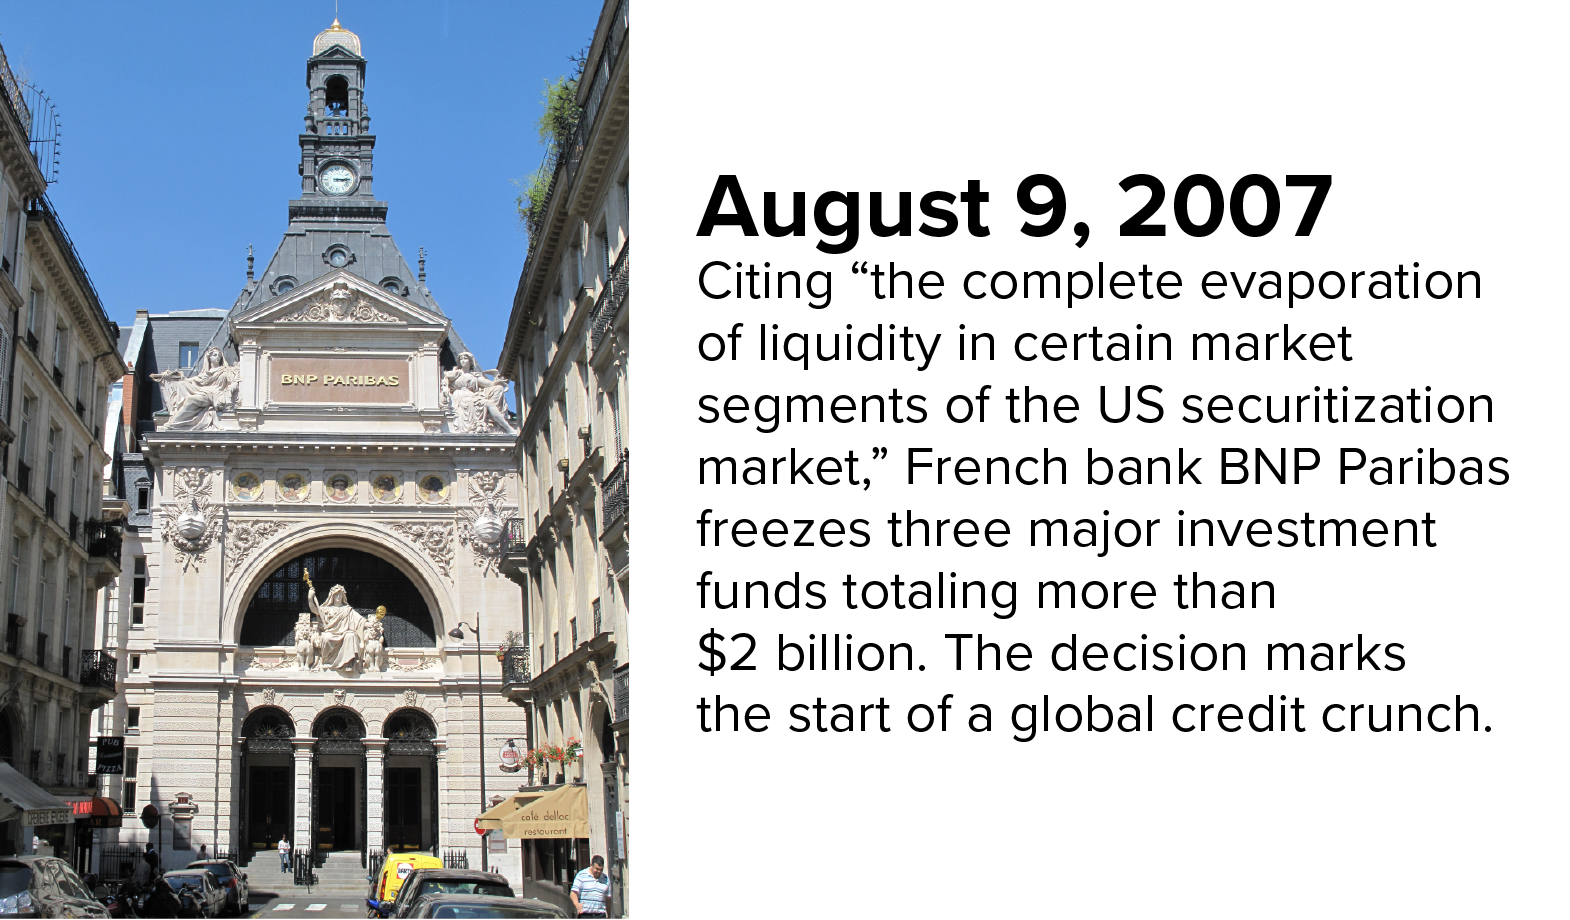 Photo of French bank BNP Paribas office, which froze major investment funds in August 2007, marking the start of a global credit crunch 